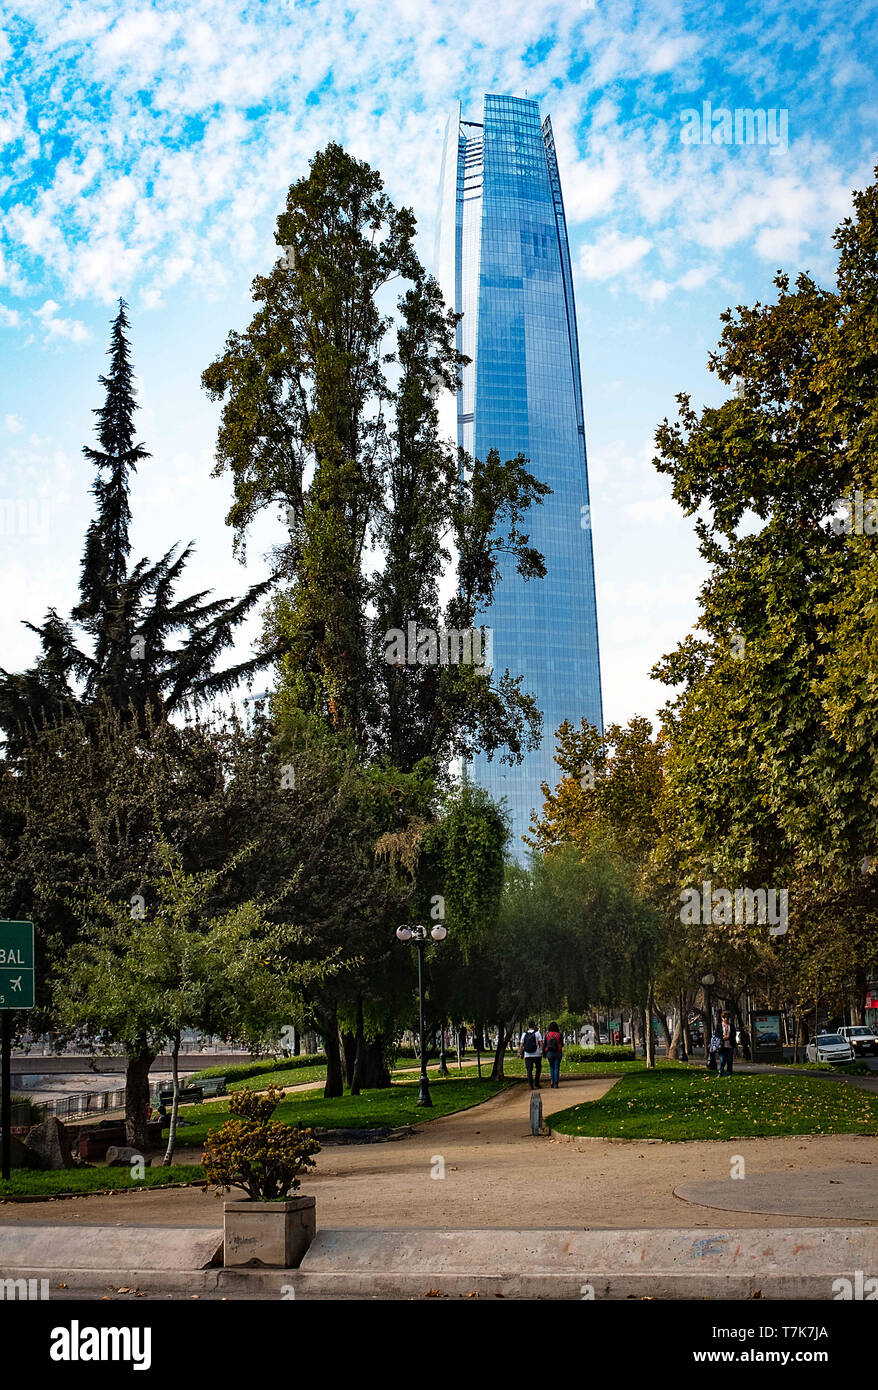 April 2019: The 64-story Gran Torre Santiago is the tallest building in Latin American and the second tallest building in the Southern Hemisphere as viewed from Parque Metropolitano, Santiago, Chile. Stock Photo